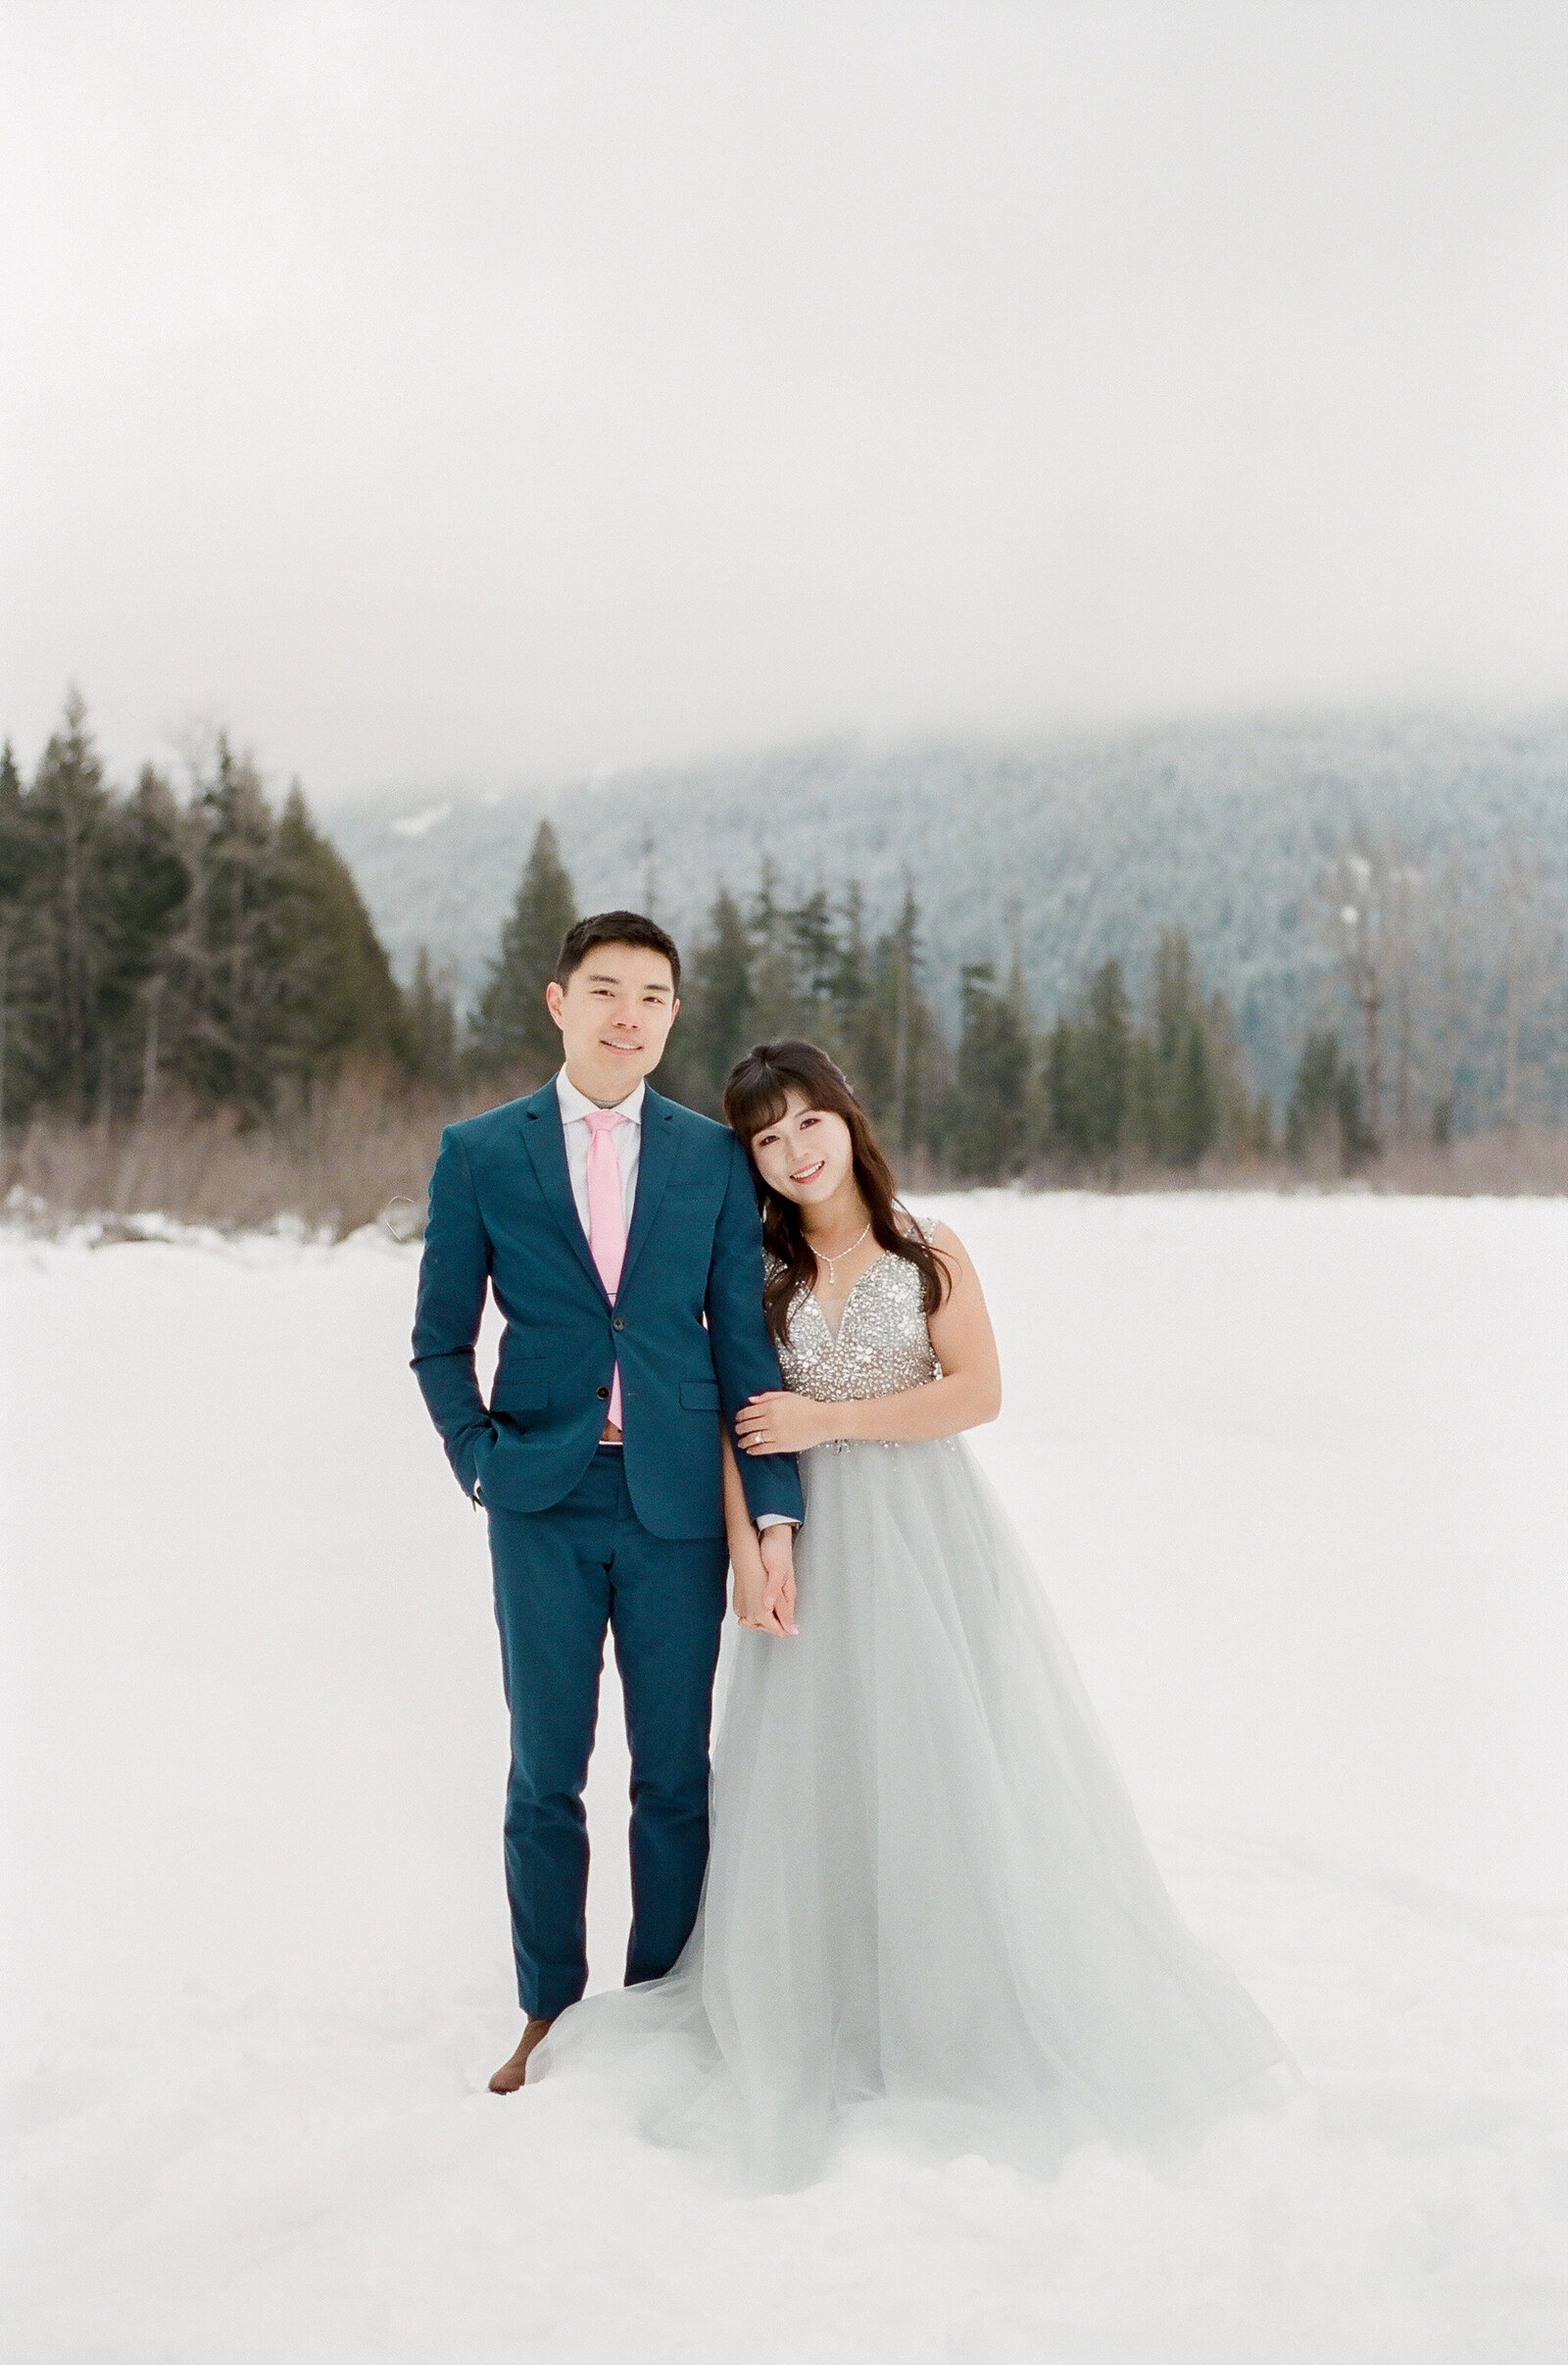 Annie and James Winter Session at Snoqualmie Pass - Kerry Jeanne Photography (66 of 178)